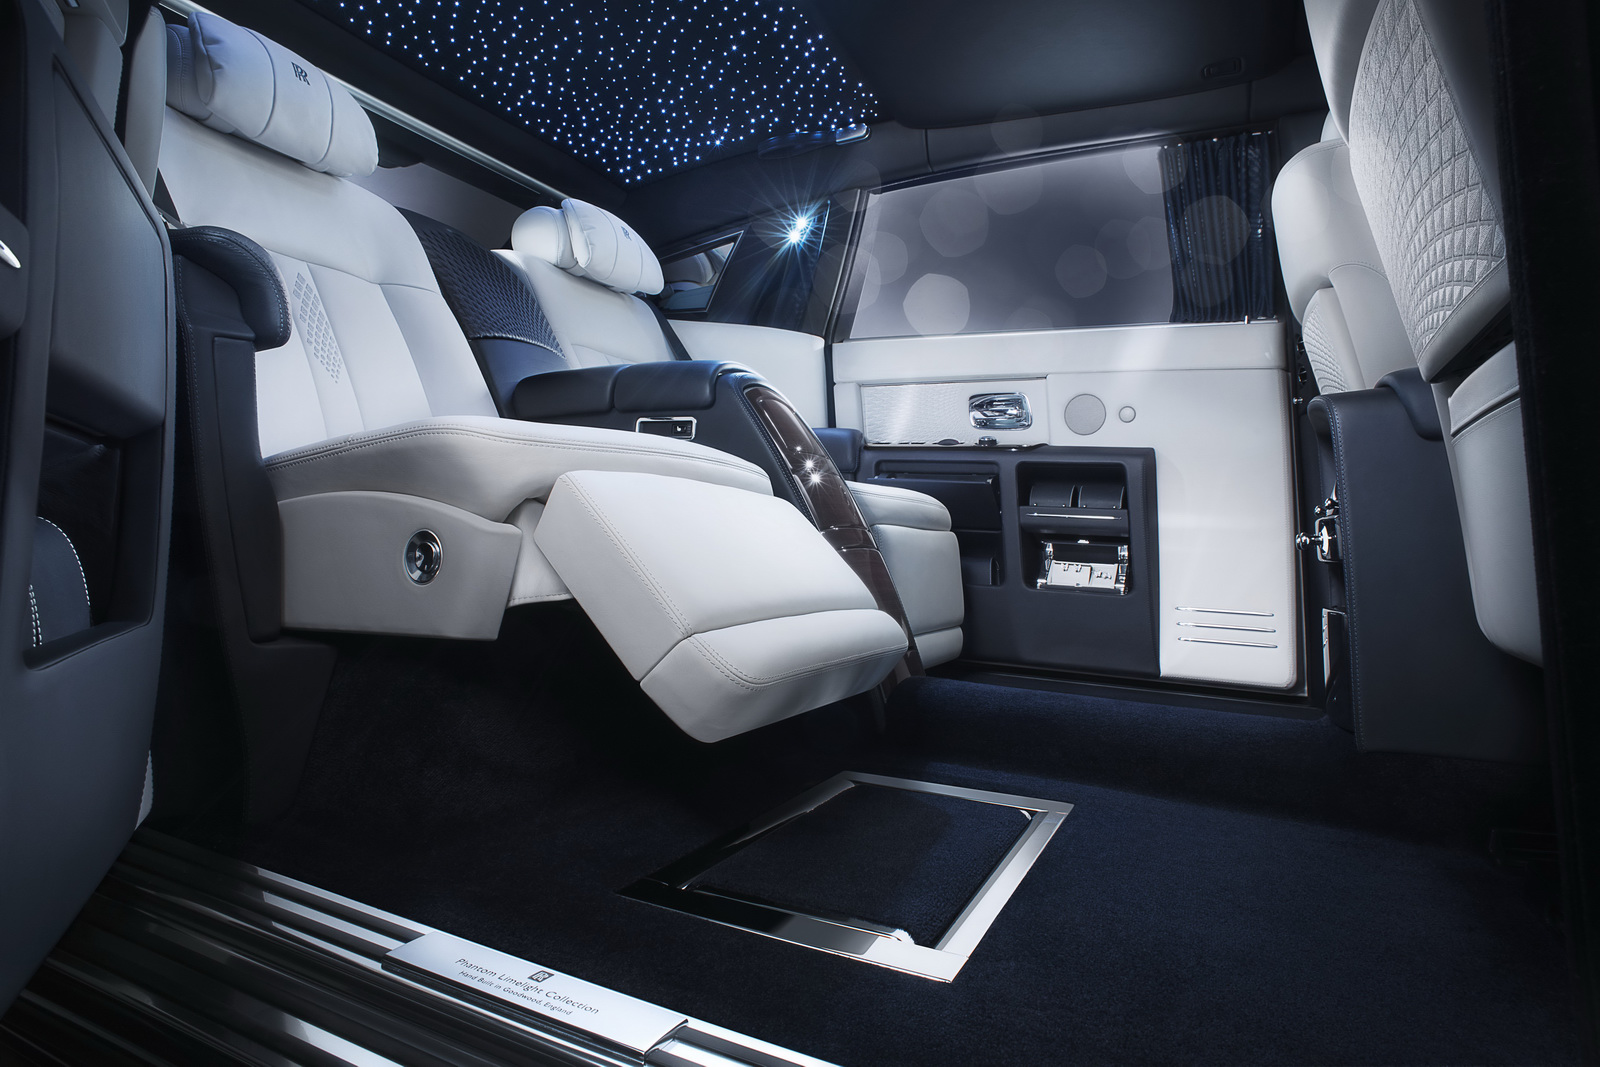  2017 Next-gen Rolls Phantom to Debut at this Year-end interior Profile